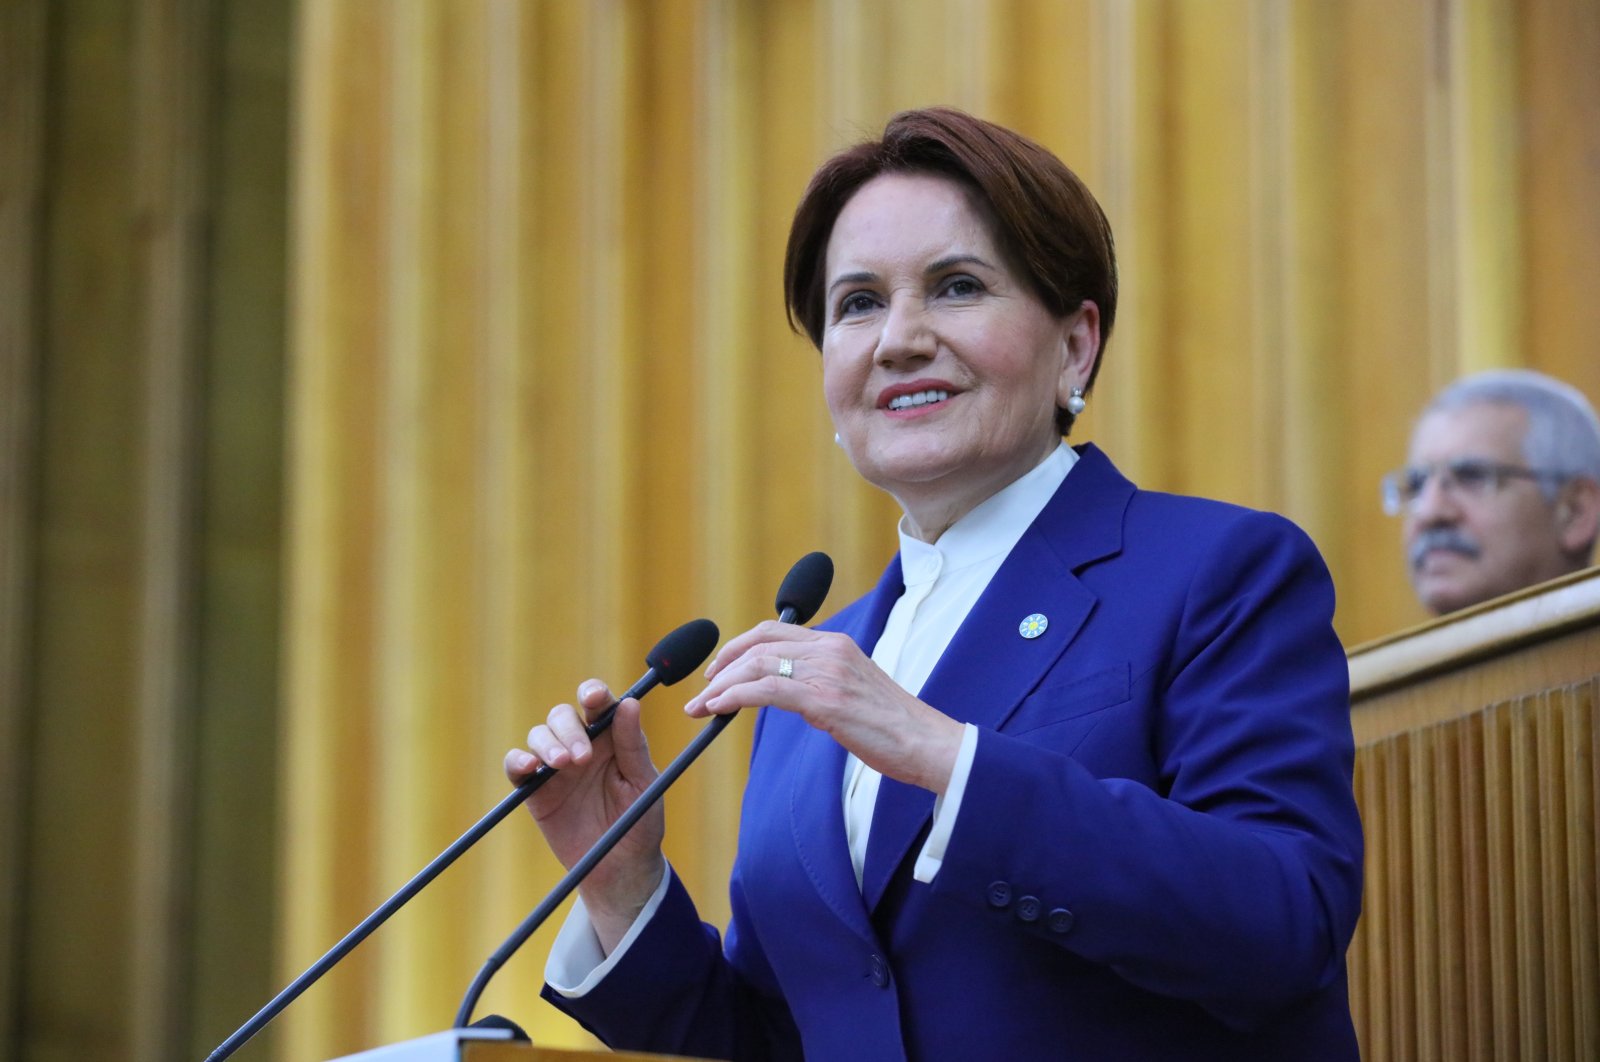 Head of İP Meral Akşener speaks at her party's group meeting in the parliament, March 10, 2020. (PHOTO BY ALİ EKEYILMAZ)